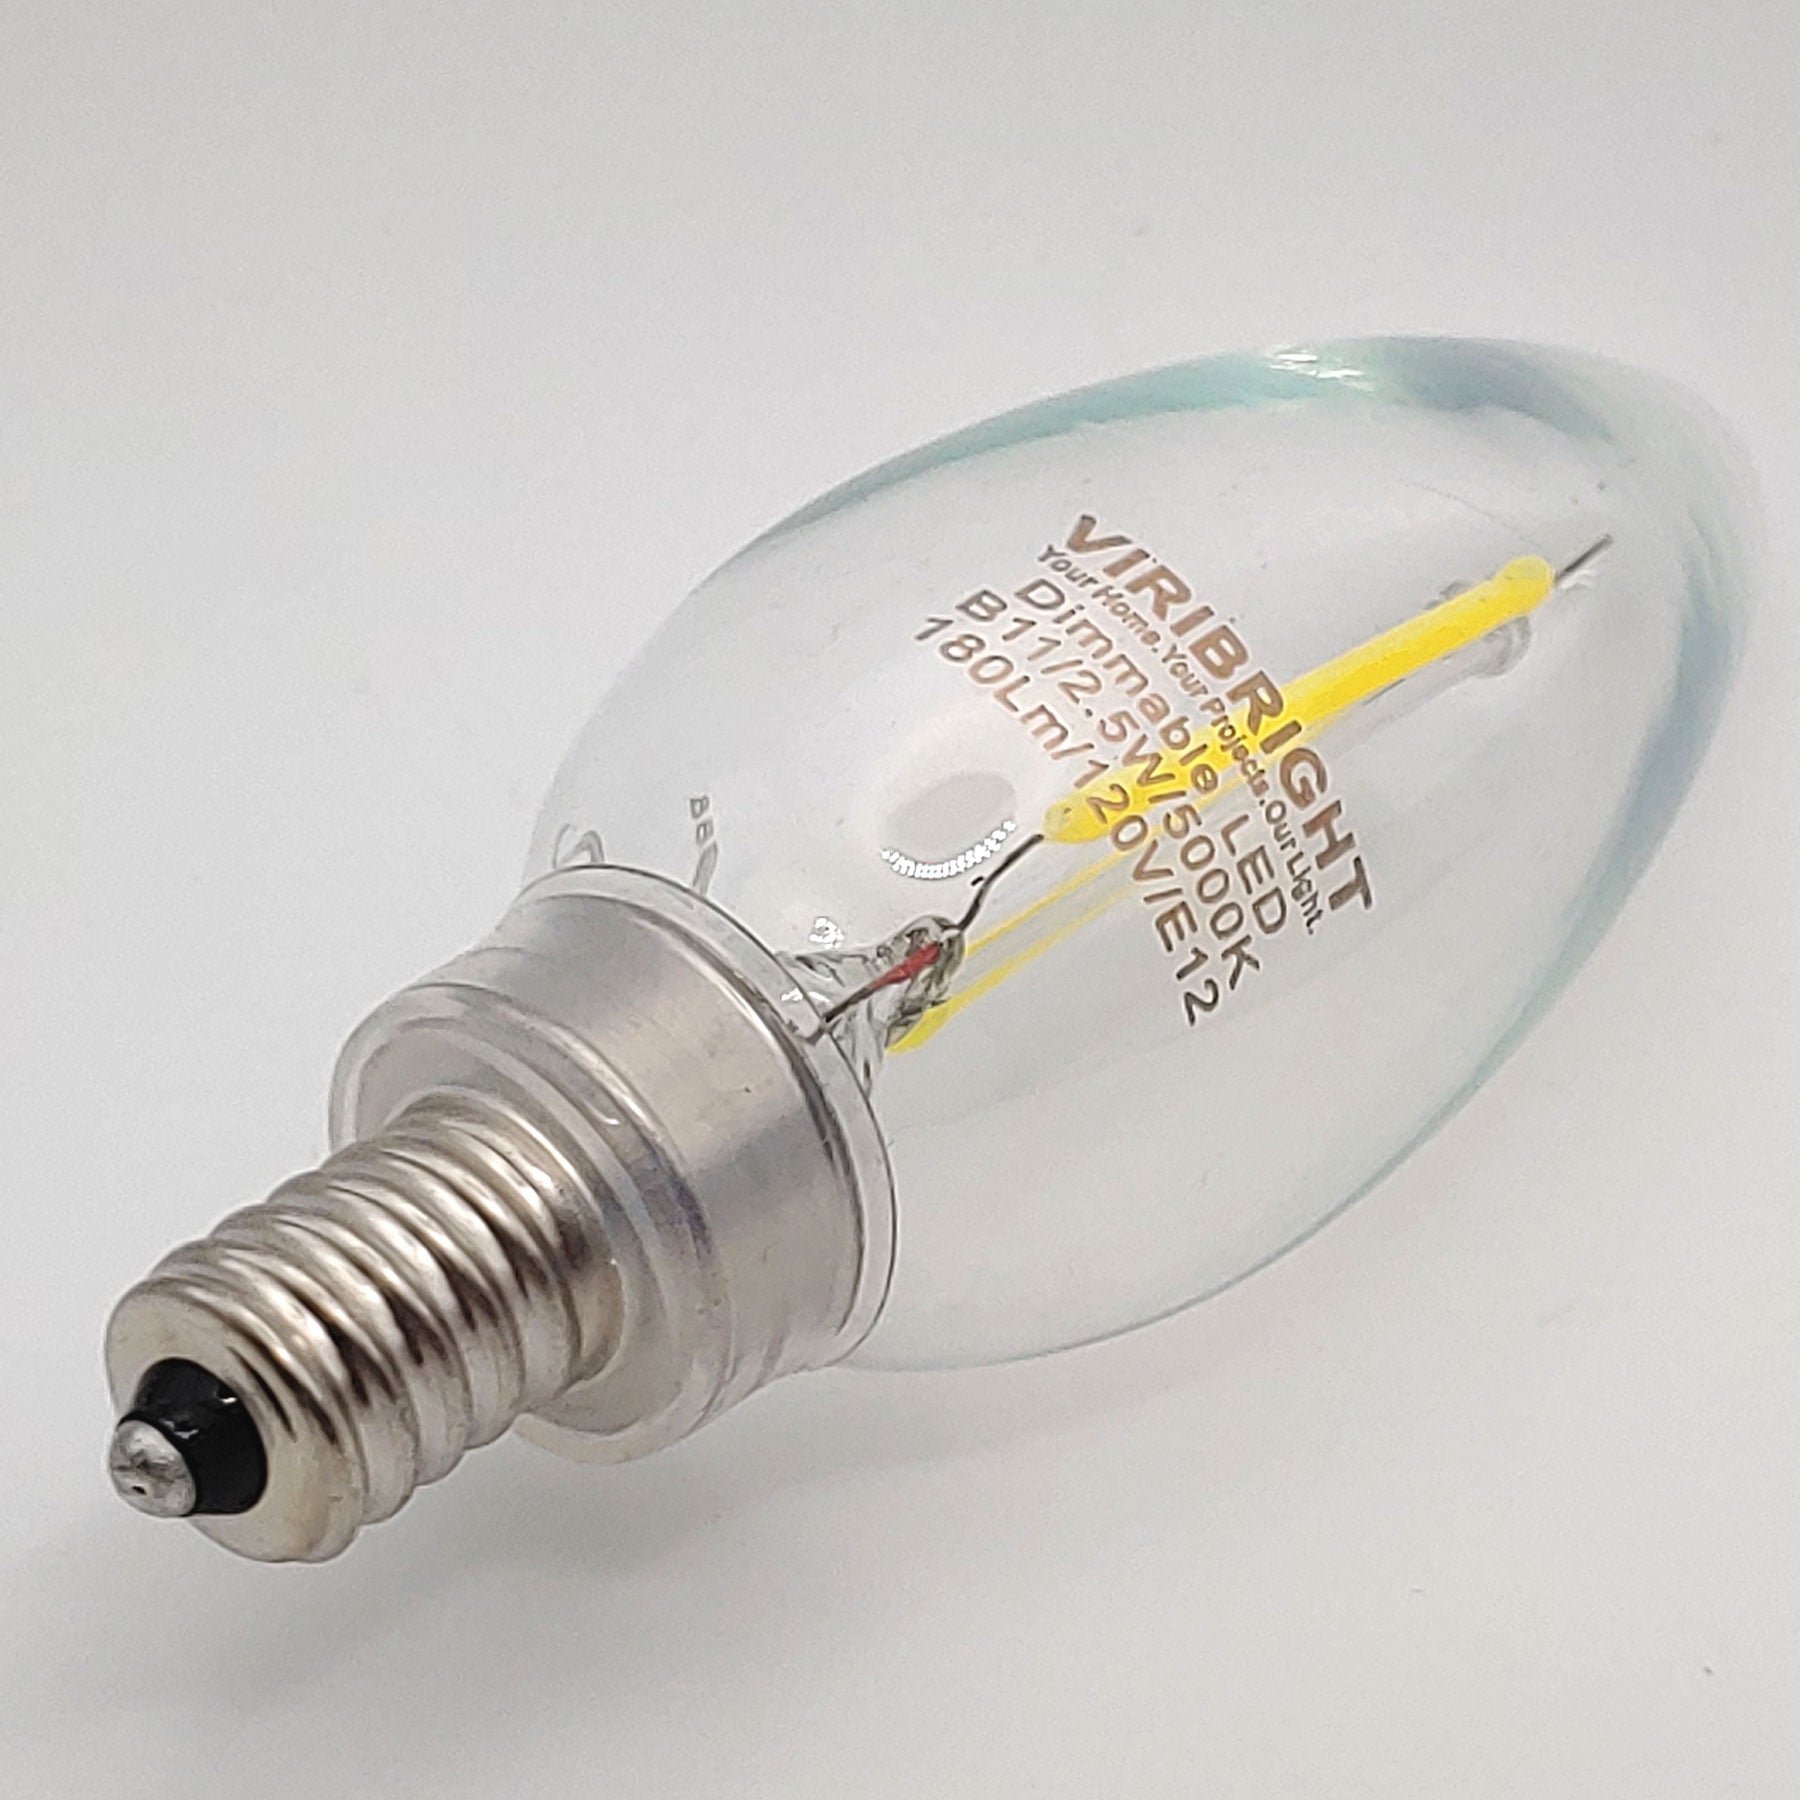 Dimmable LED bulb